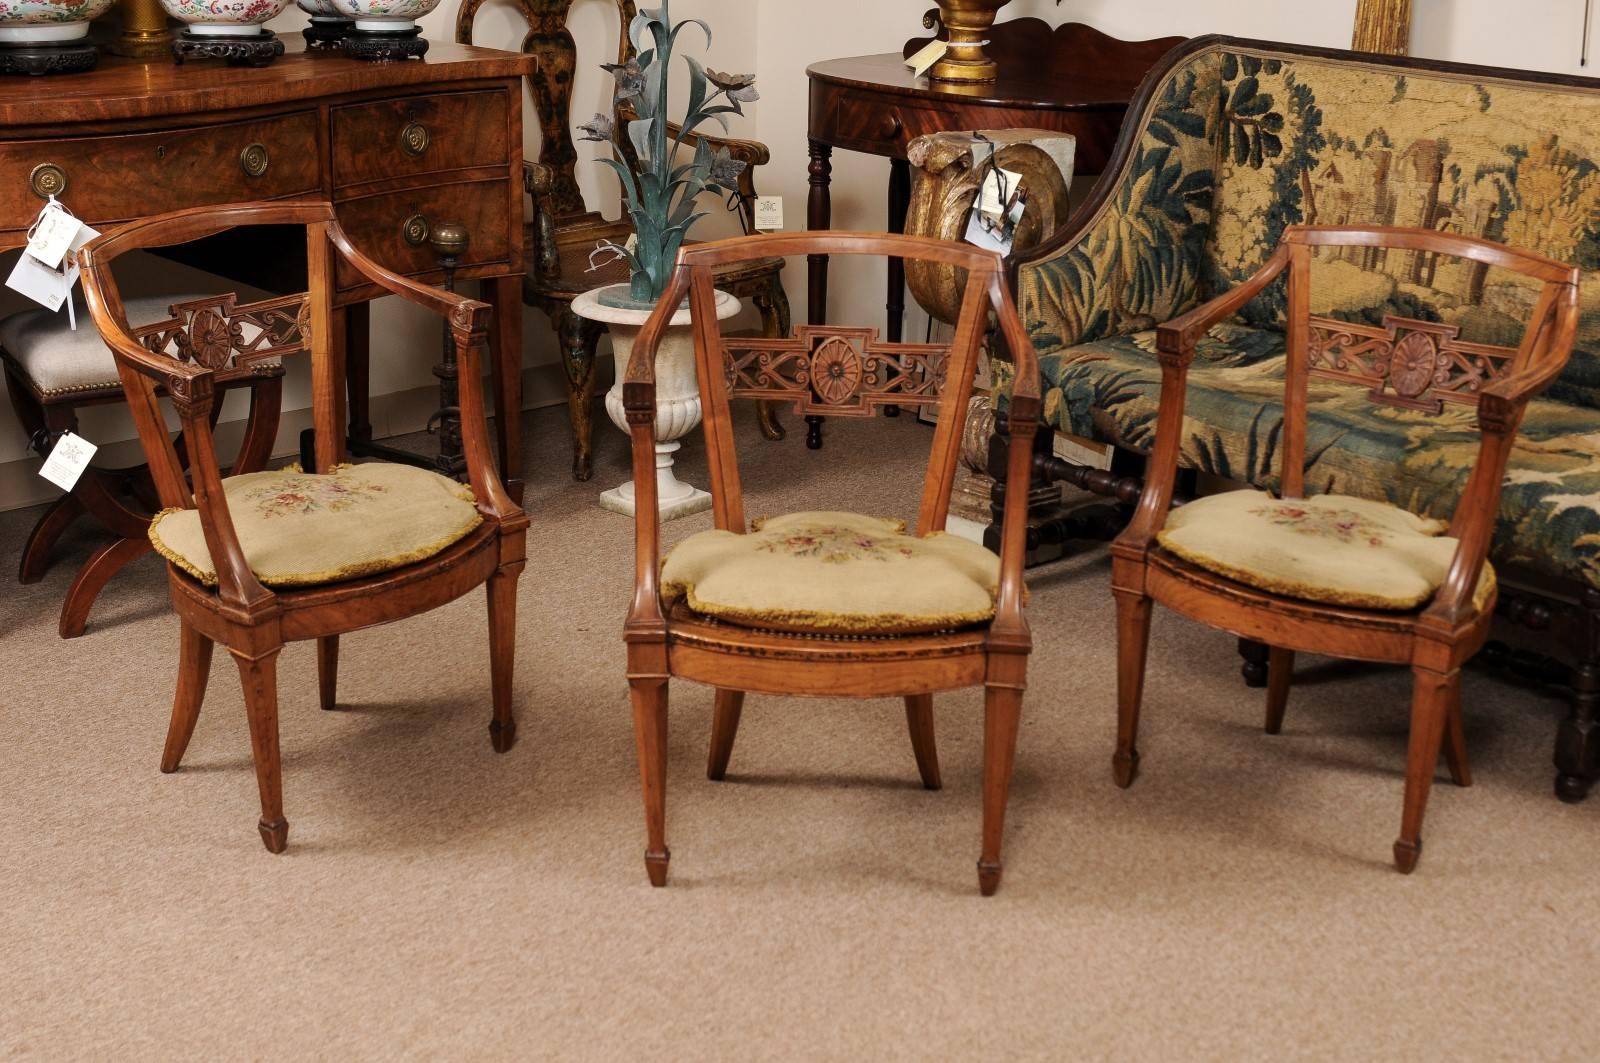 Neoclassical period fruitwood open arm chair with cane seat and tapered legs ending in spade feet, 18th century, Italy. Needlepoint loose cushion available.